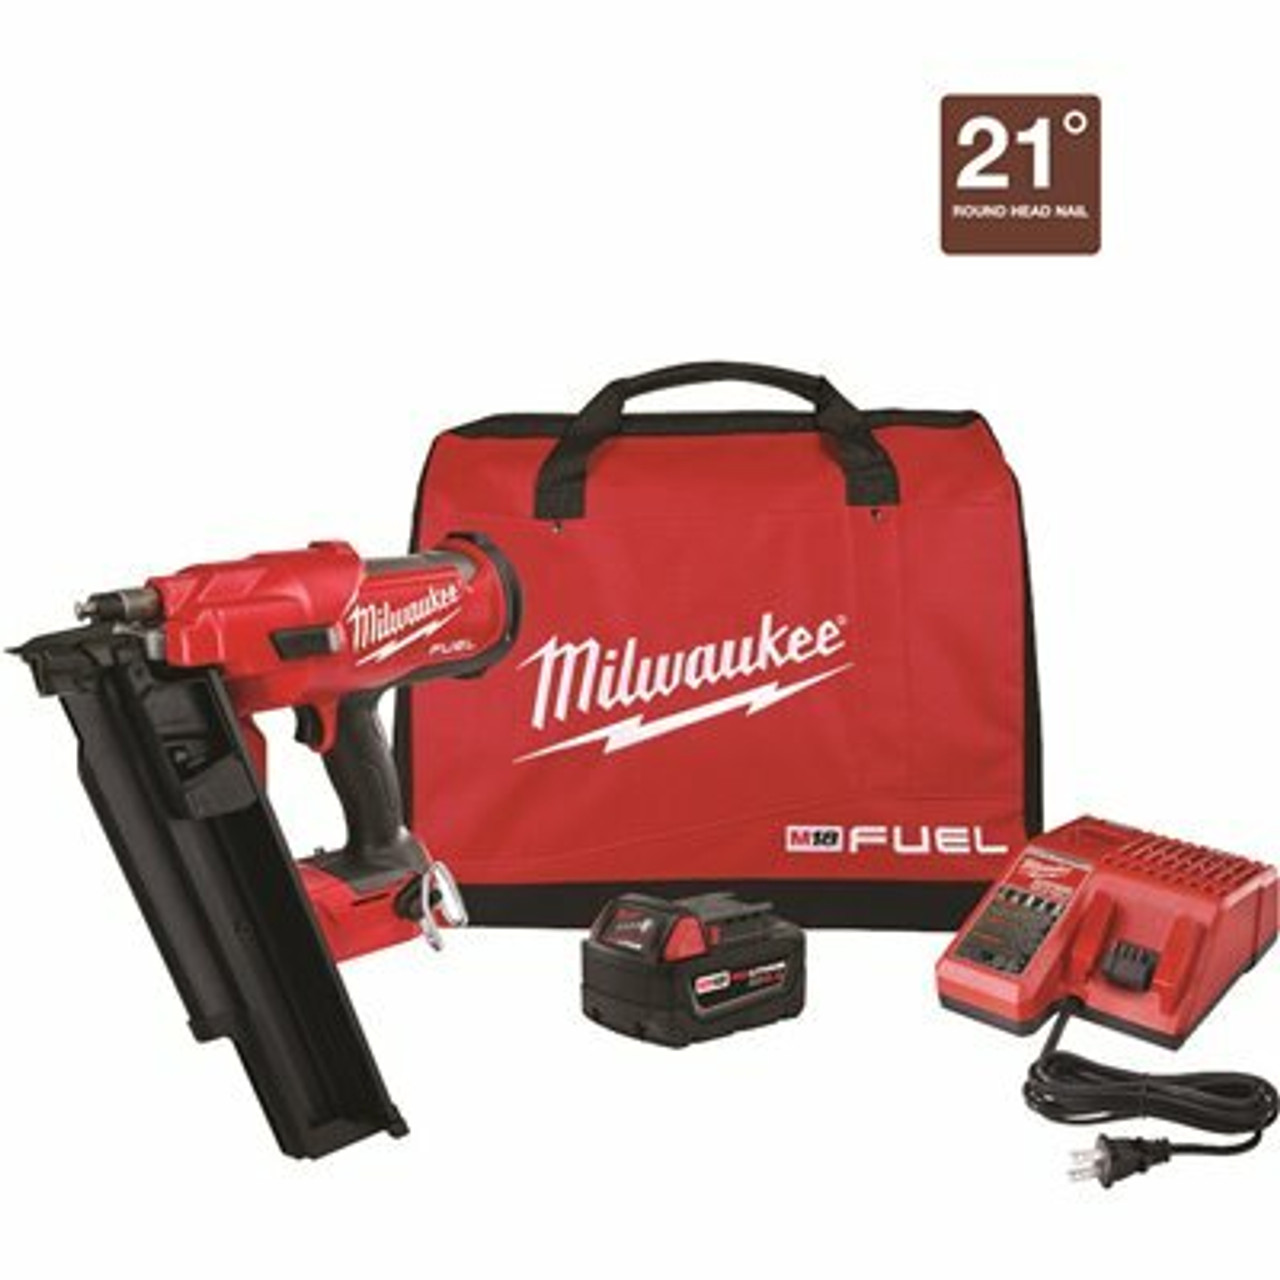 M18 Fuel 3-1/2 In. 18-Volt 21 Deg. Lithium-Ion Brushless Cordless Framing Nailer Kit With 5.0 Ah Battery, Charger, Bag